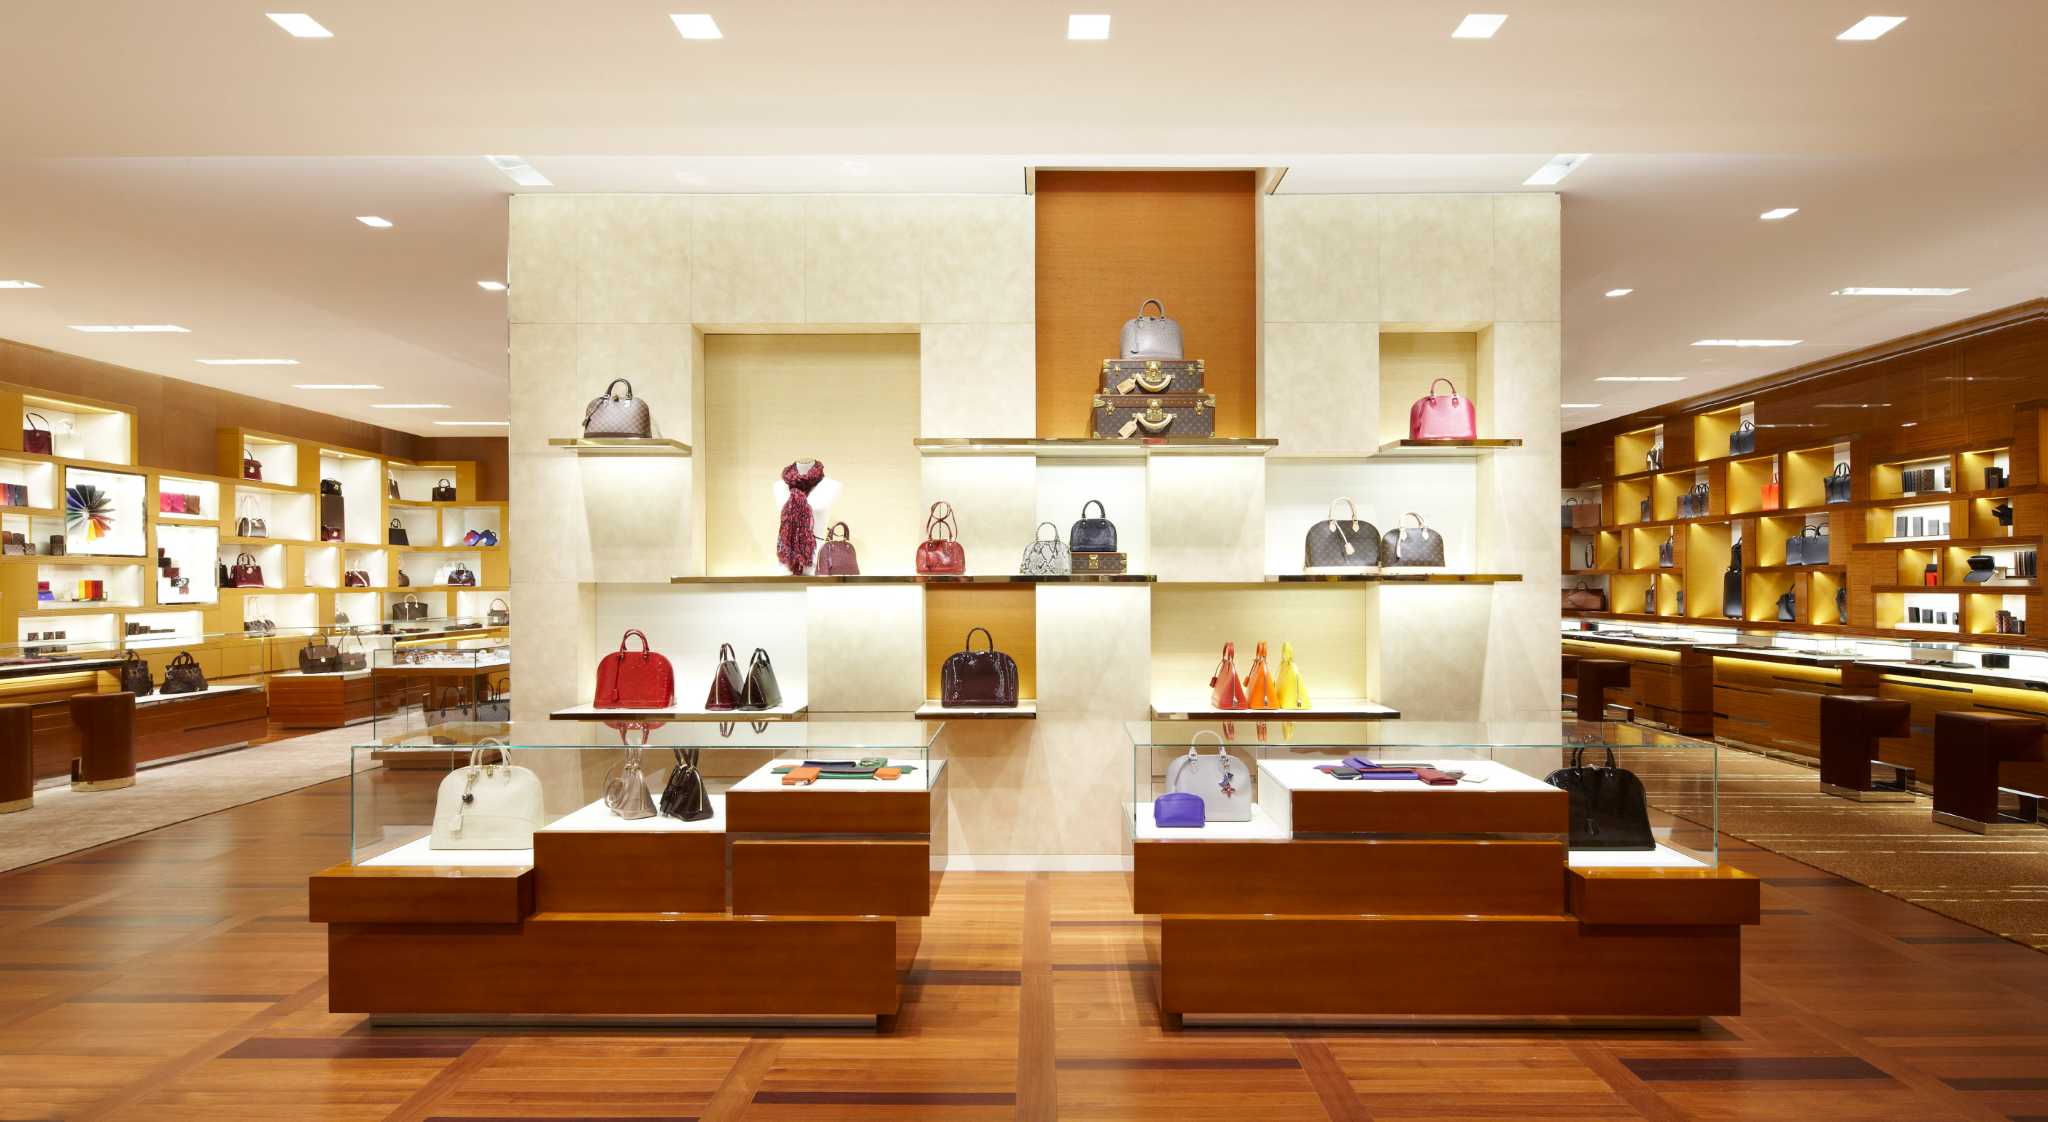 New Louis Vuitton Store in Houston Galleria is a True Texas First